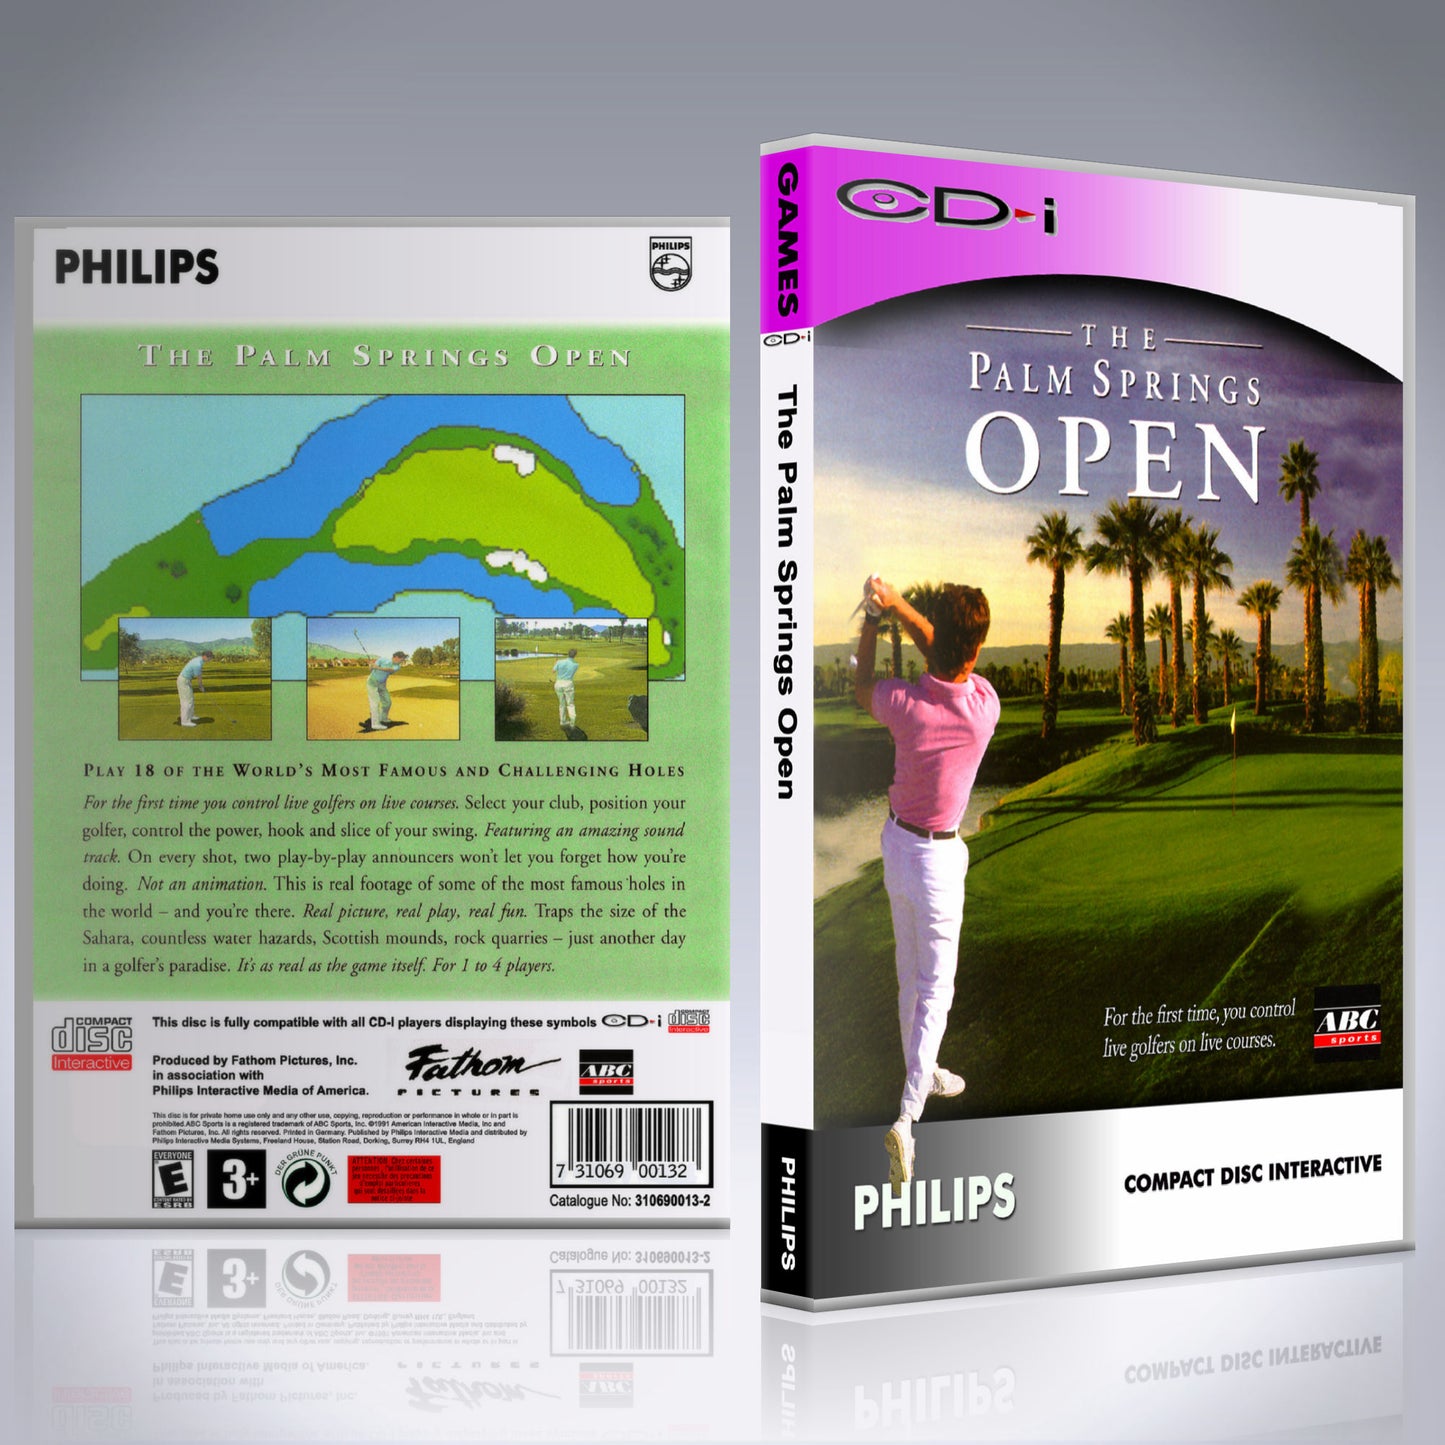 CDi - NO GAME - The Palm Springs Open